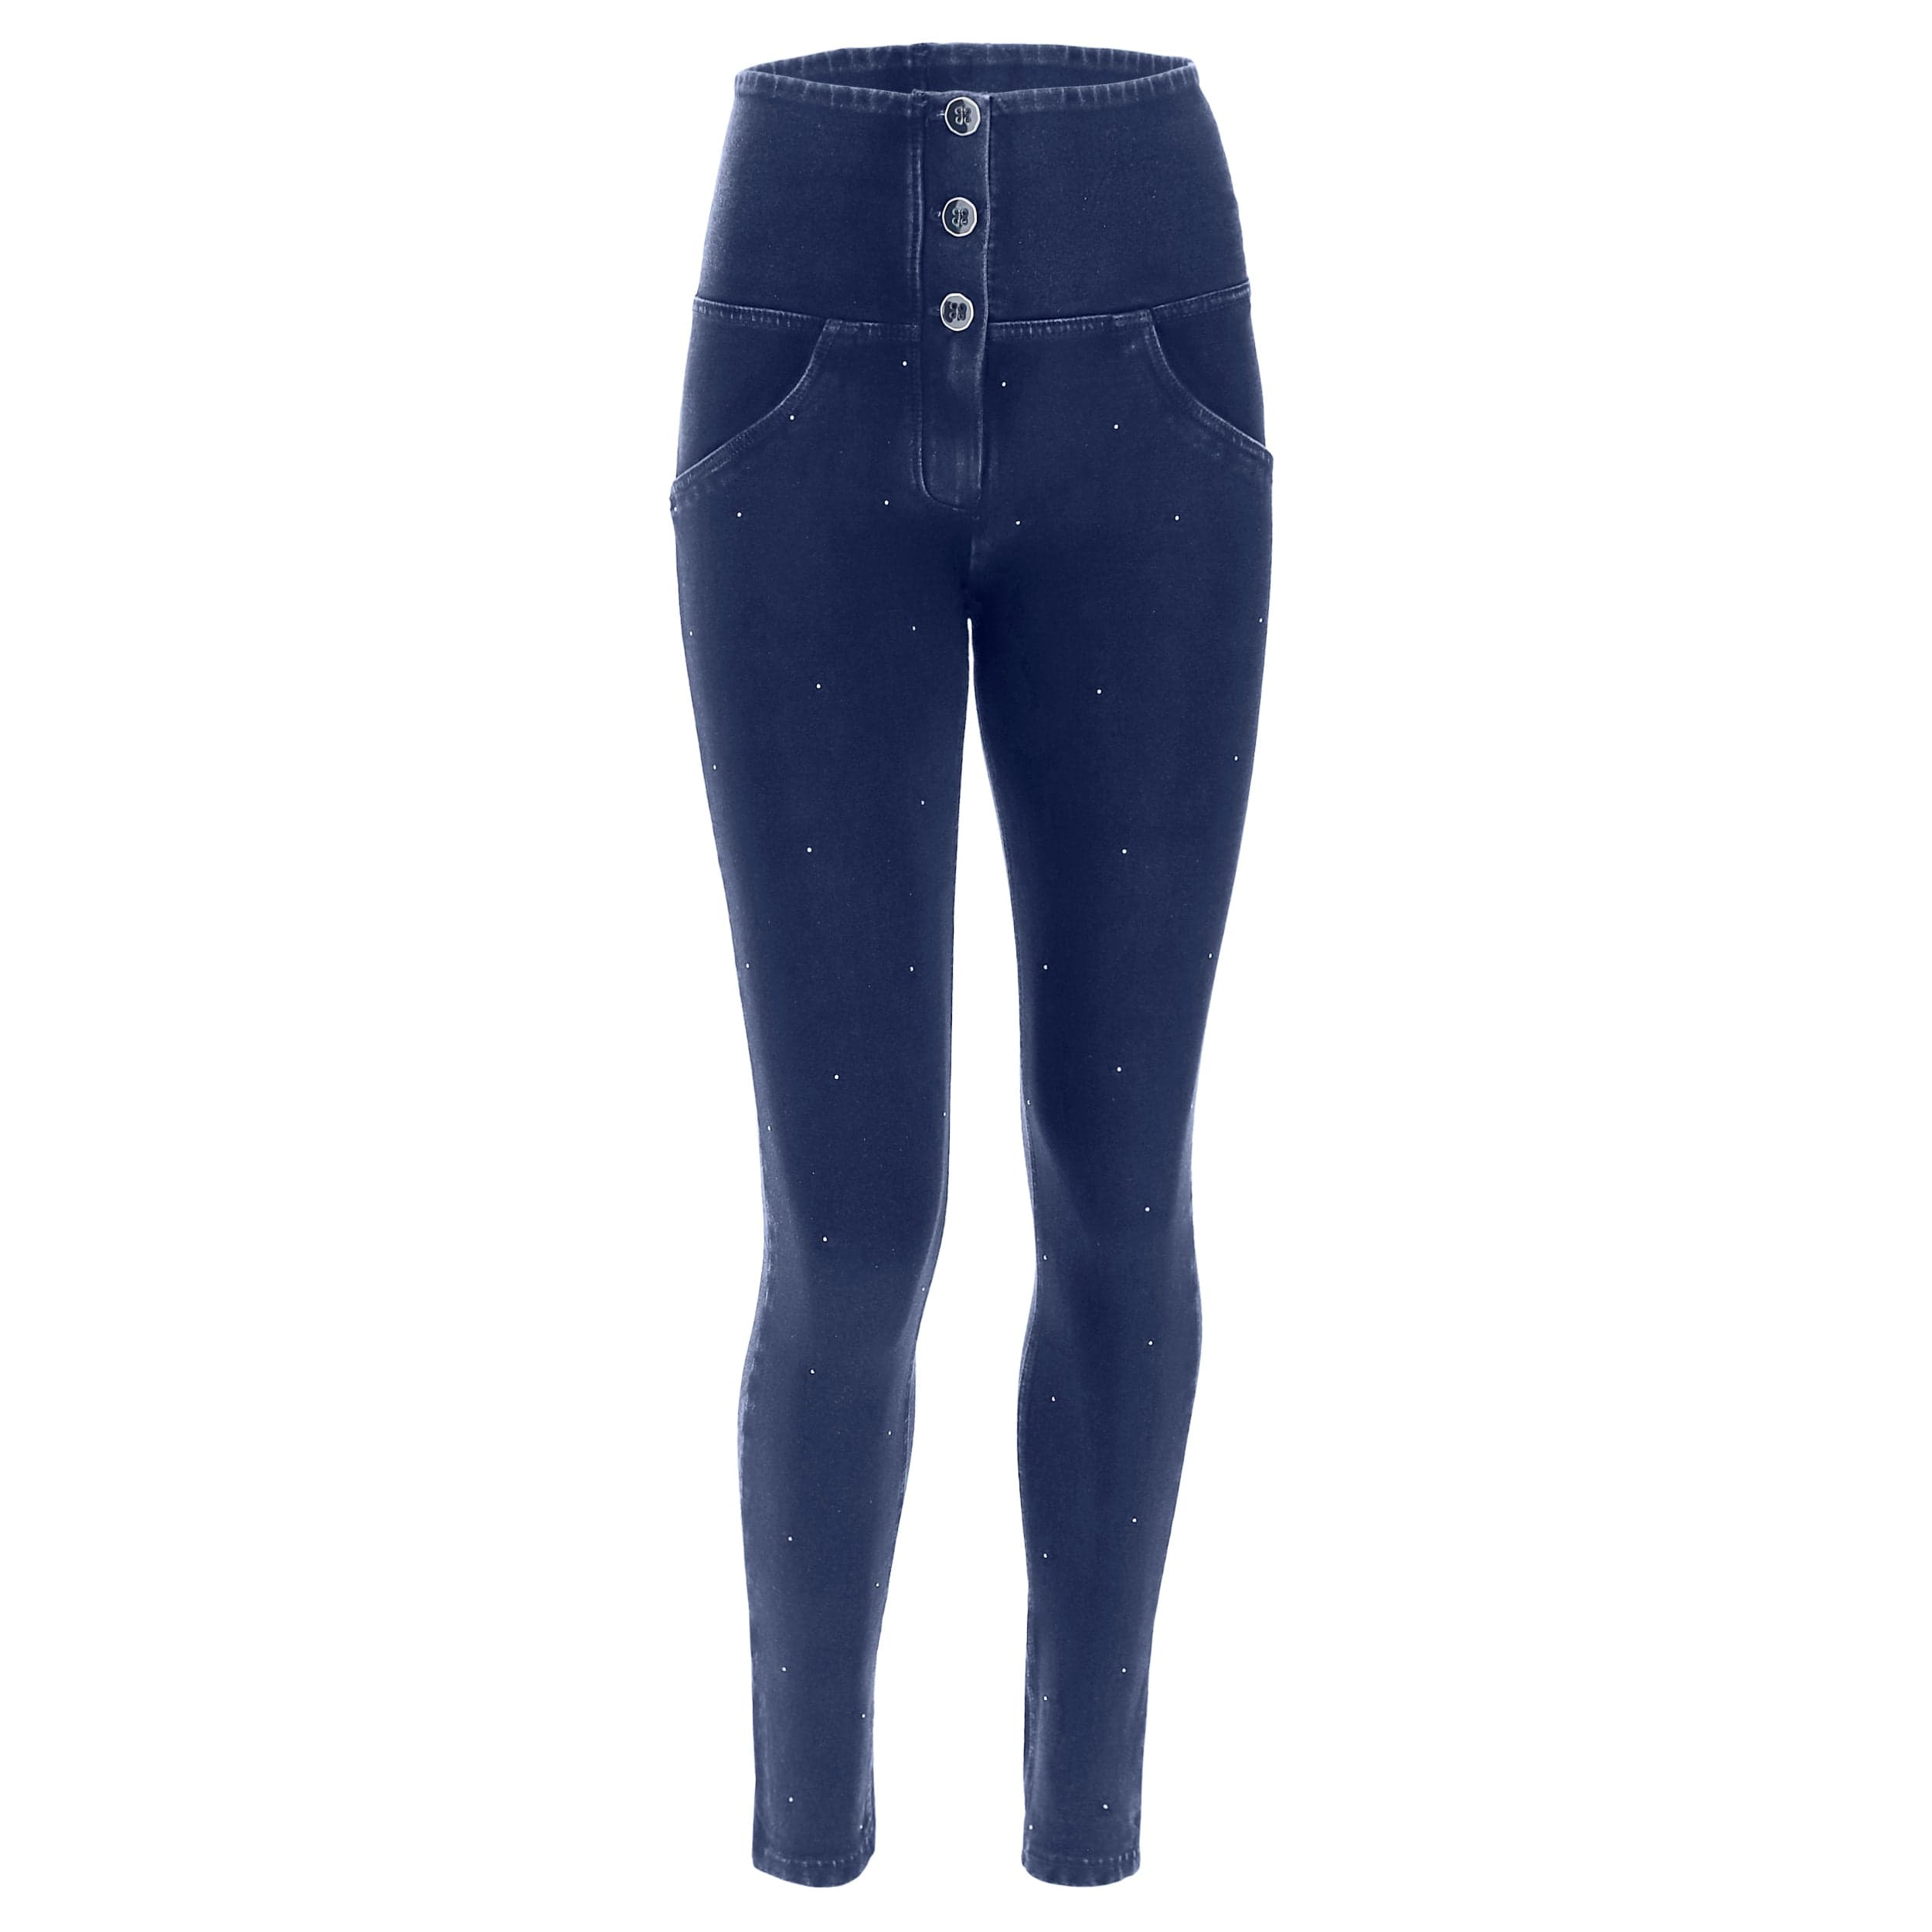 WR.UP® Denim with Micro Studs - 3 Button High Waisted - Full Length - Dark Blue + Blue Stitching 1